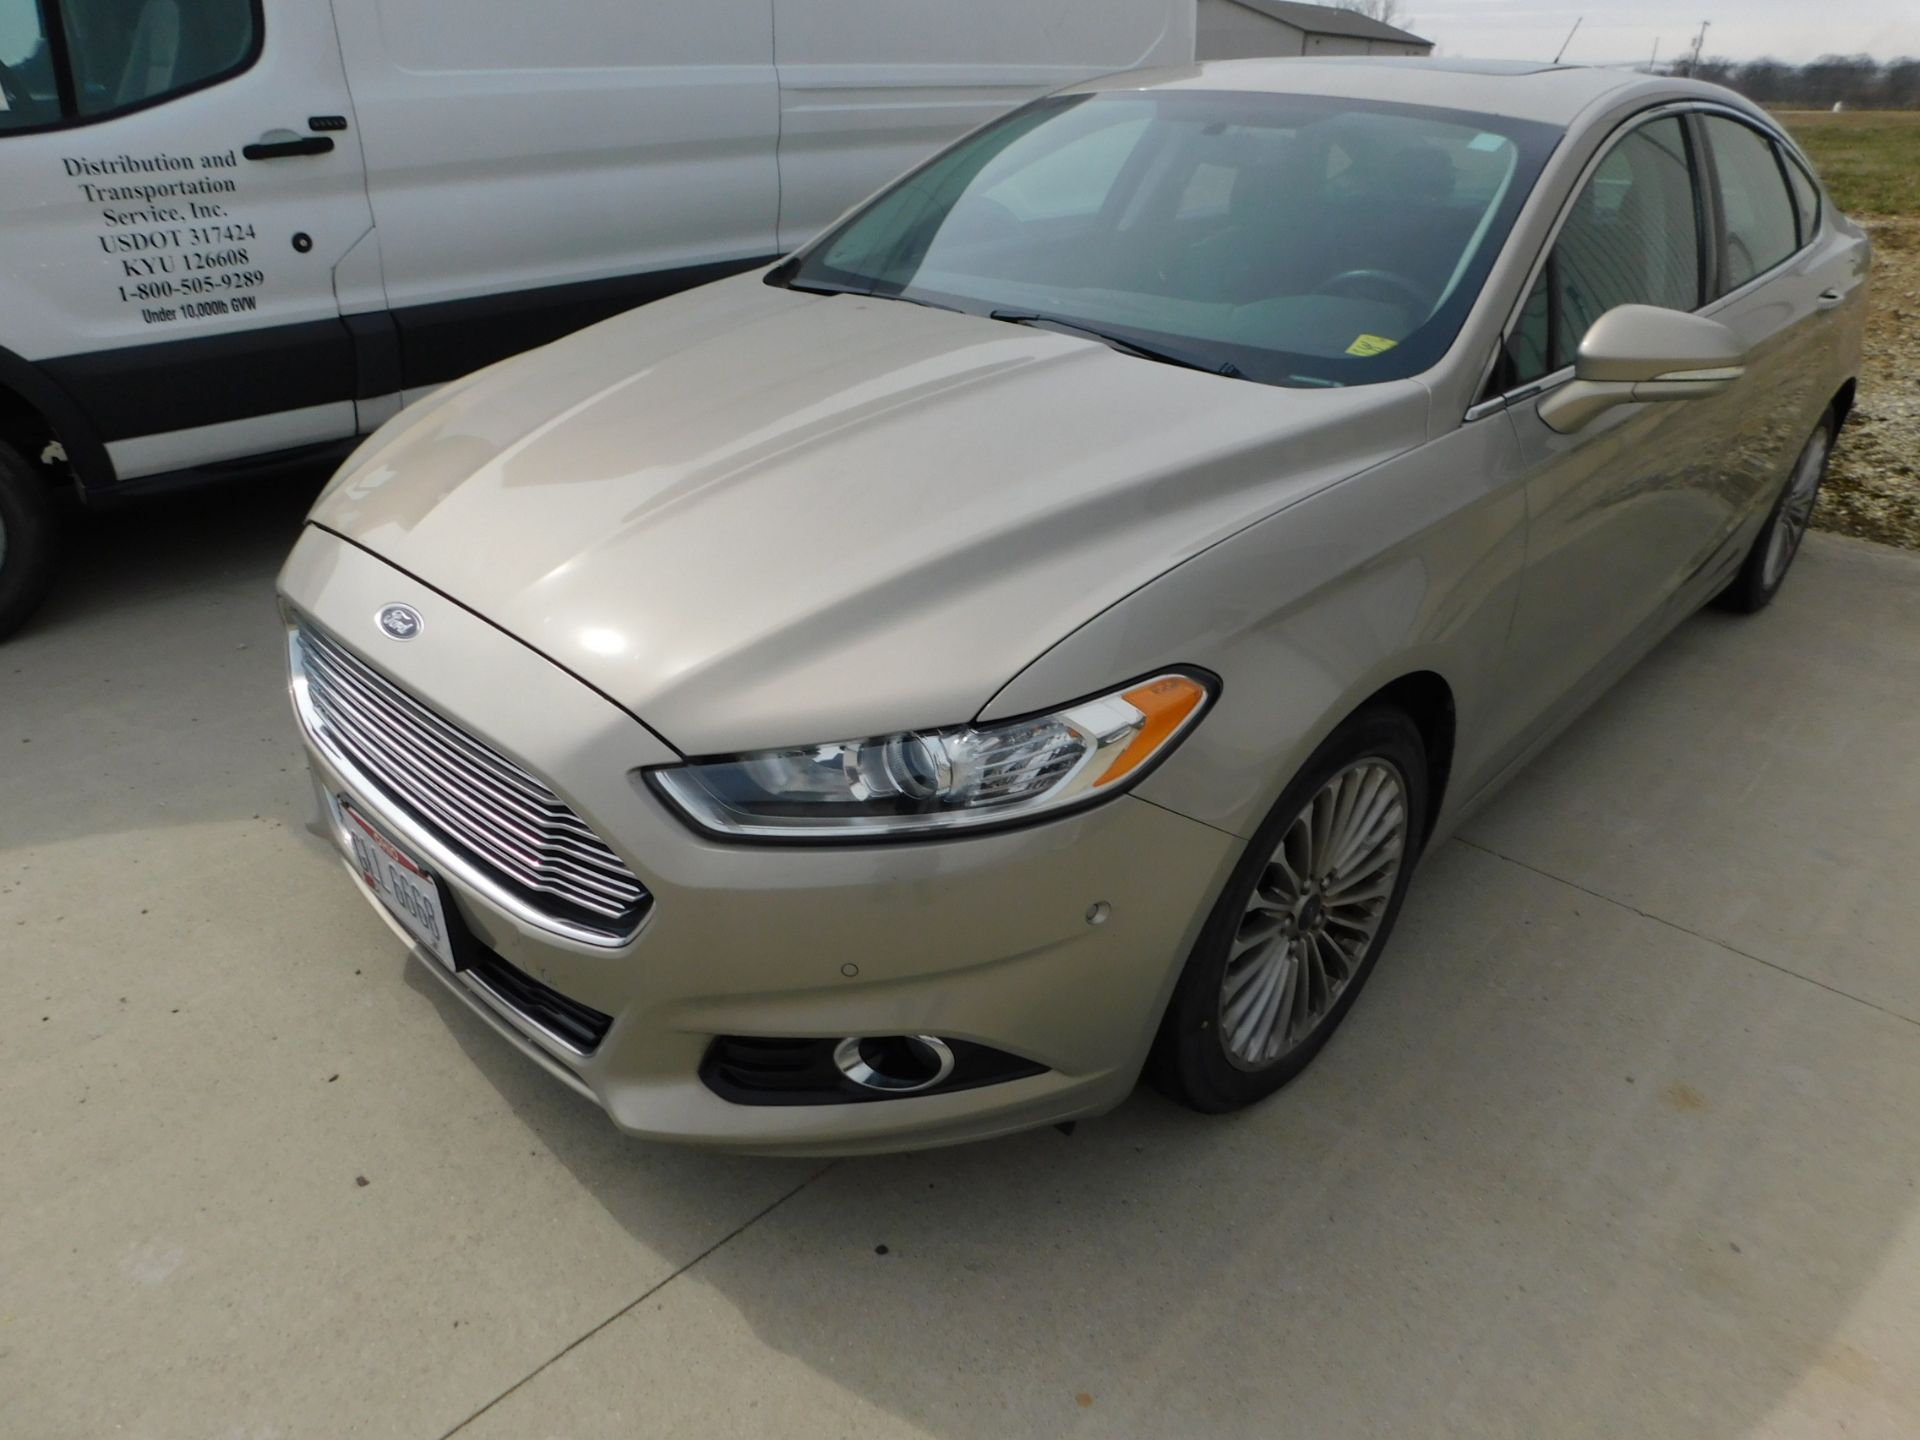 2015 Ford Fusion, Eco Boost AWD, Titanium Edition, VIN 3FA6P0D9XFR181007, Location 1 - 1100 Tower - Image 3 of 8